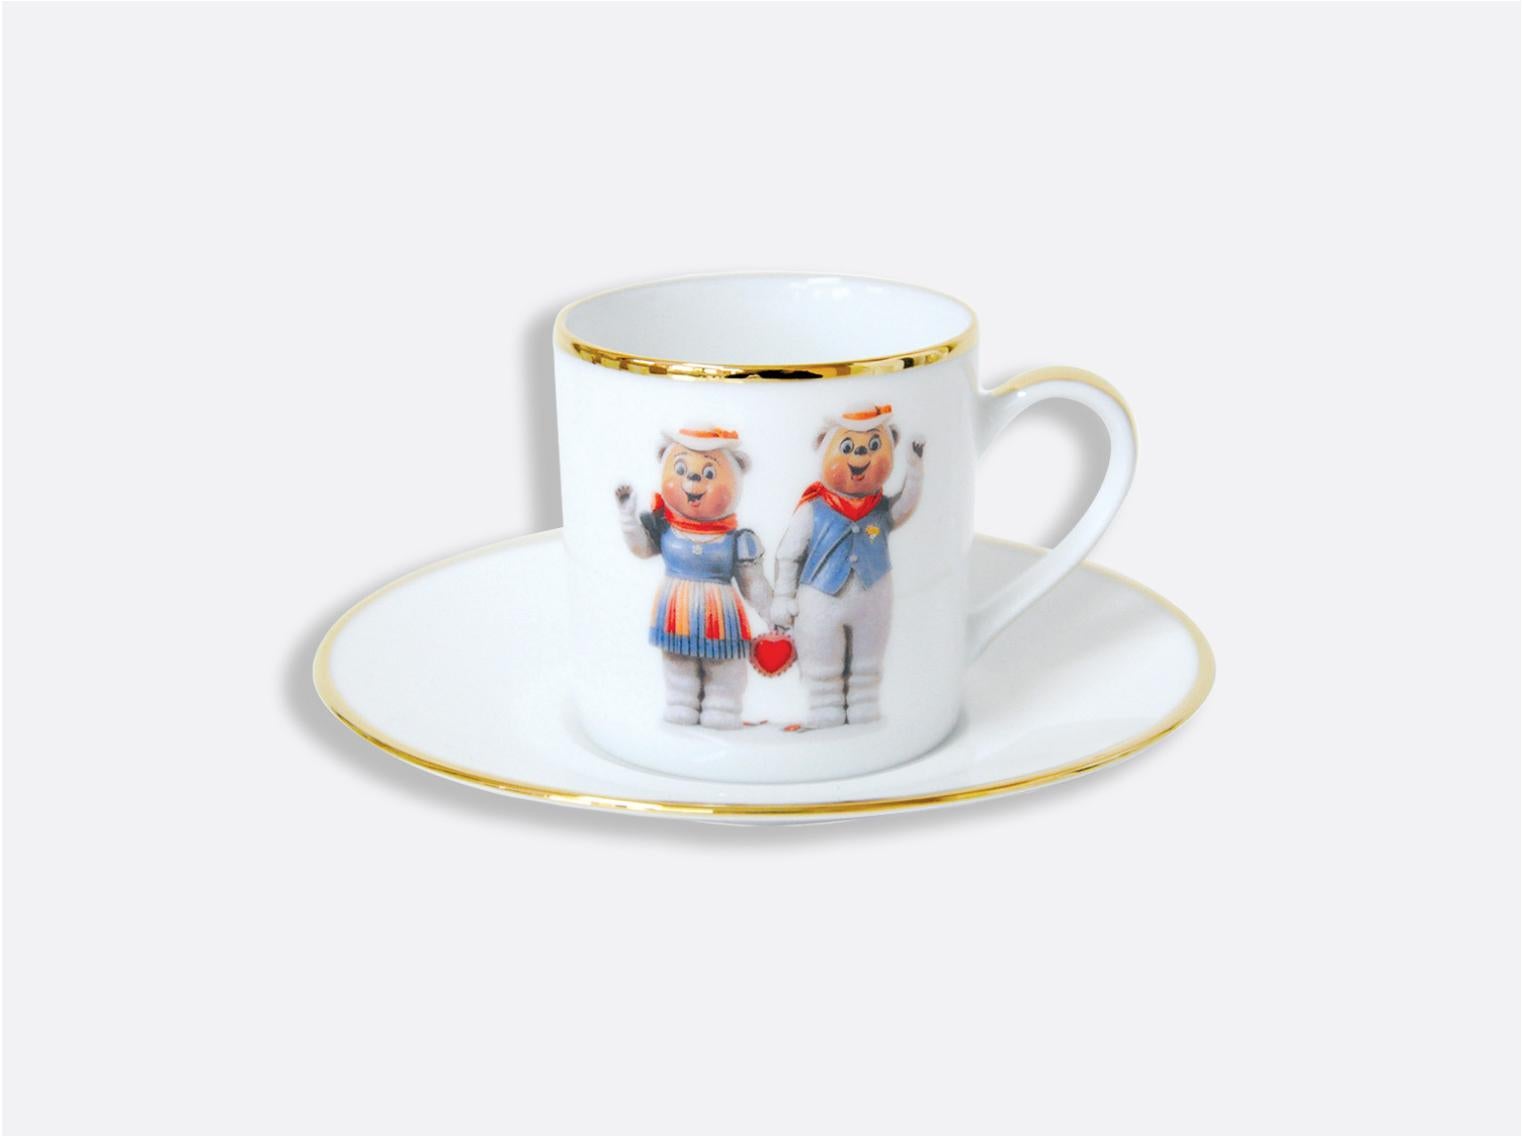 Porcelain Banality Series AD Cup and Saucer Set by Jeff Koons